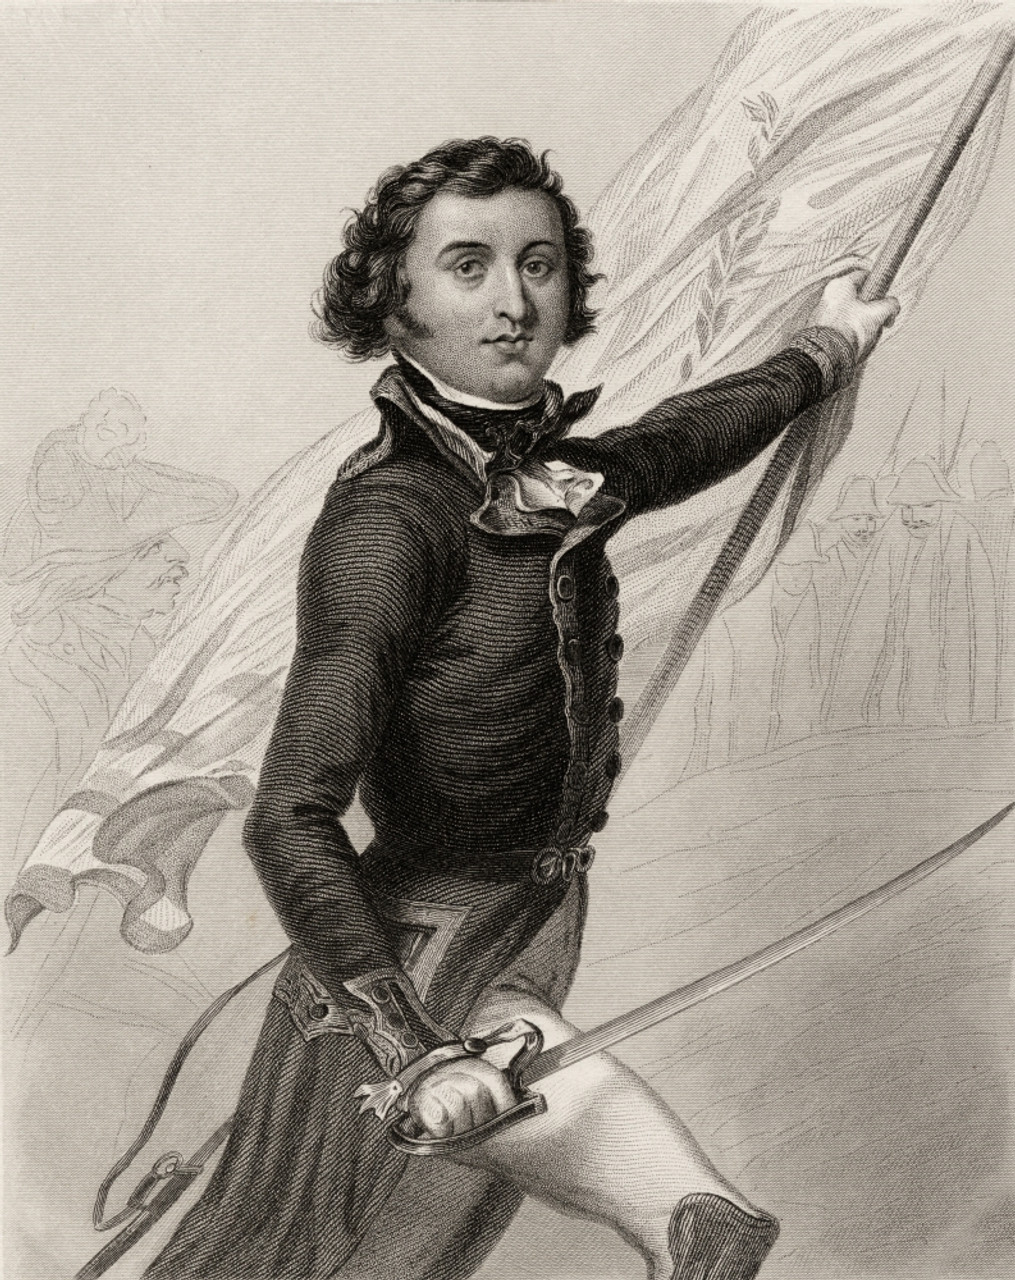 Image of Louis Philippe d'Orleans (1773-1850) french king in 1830